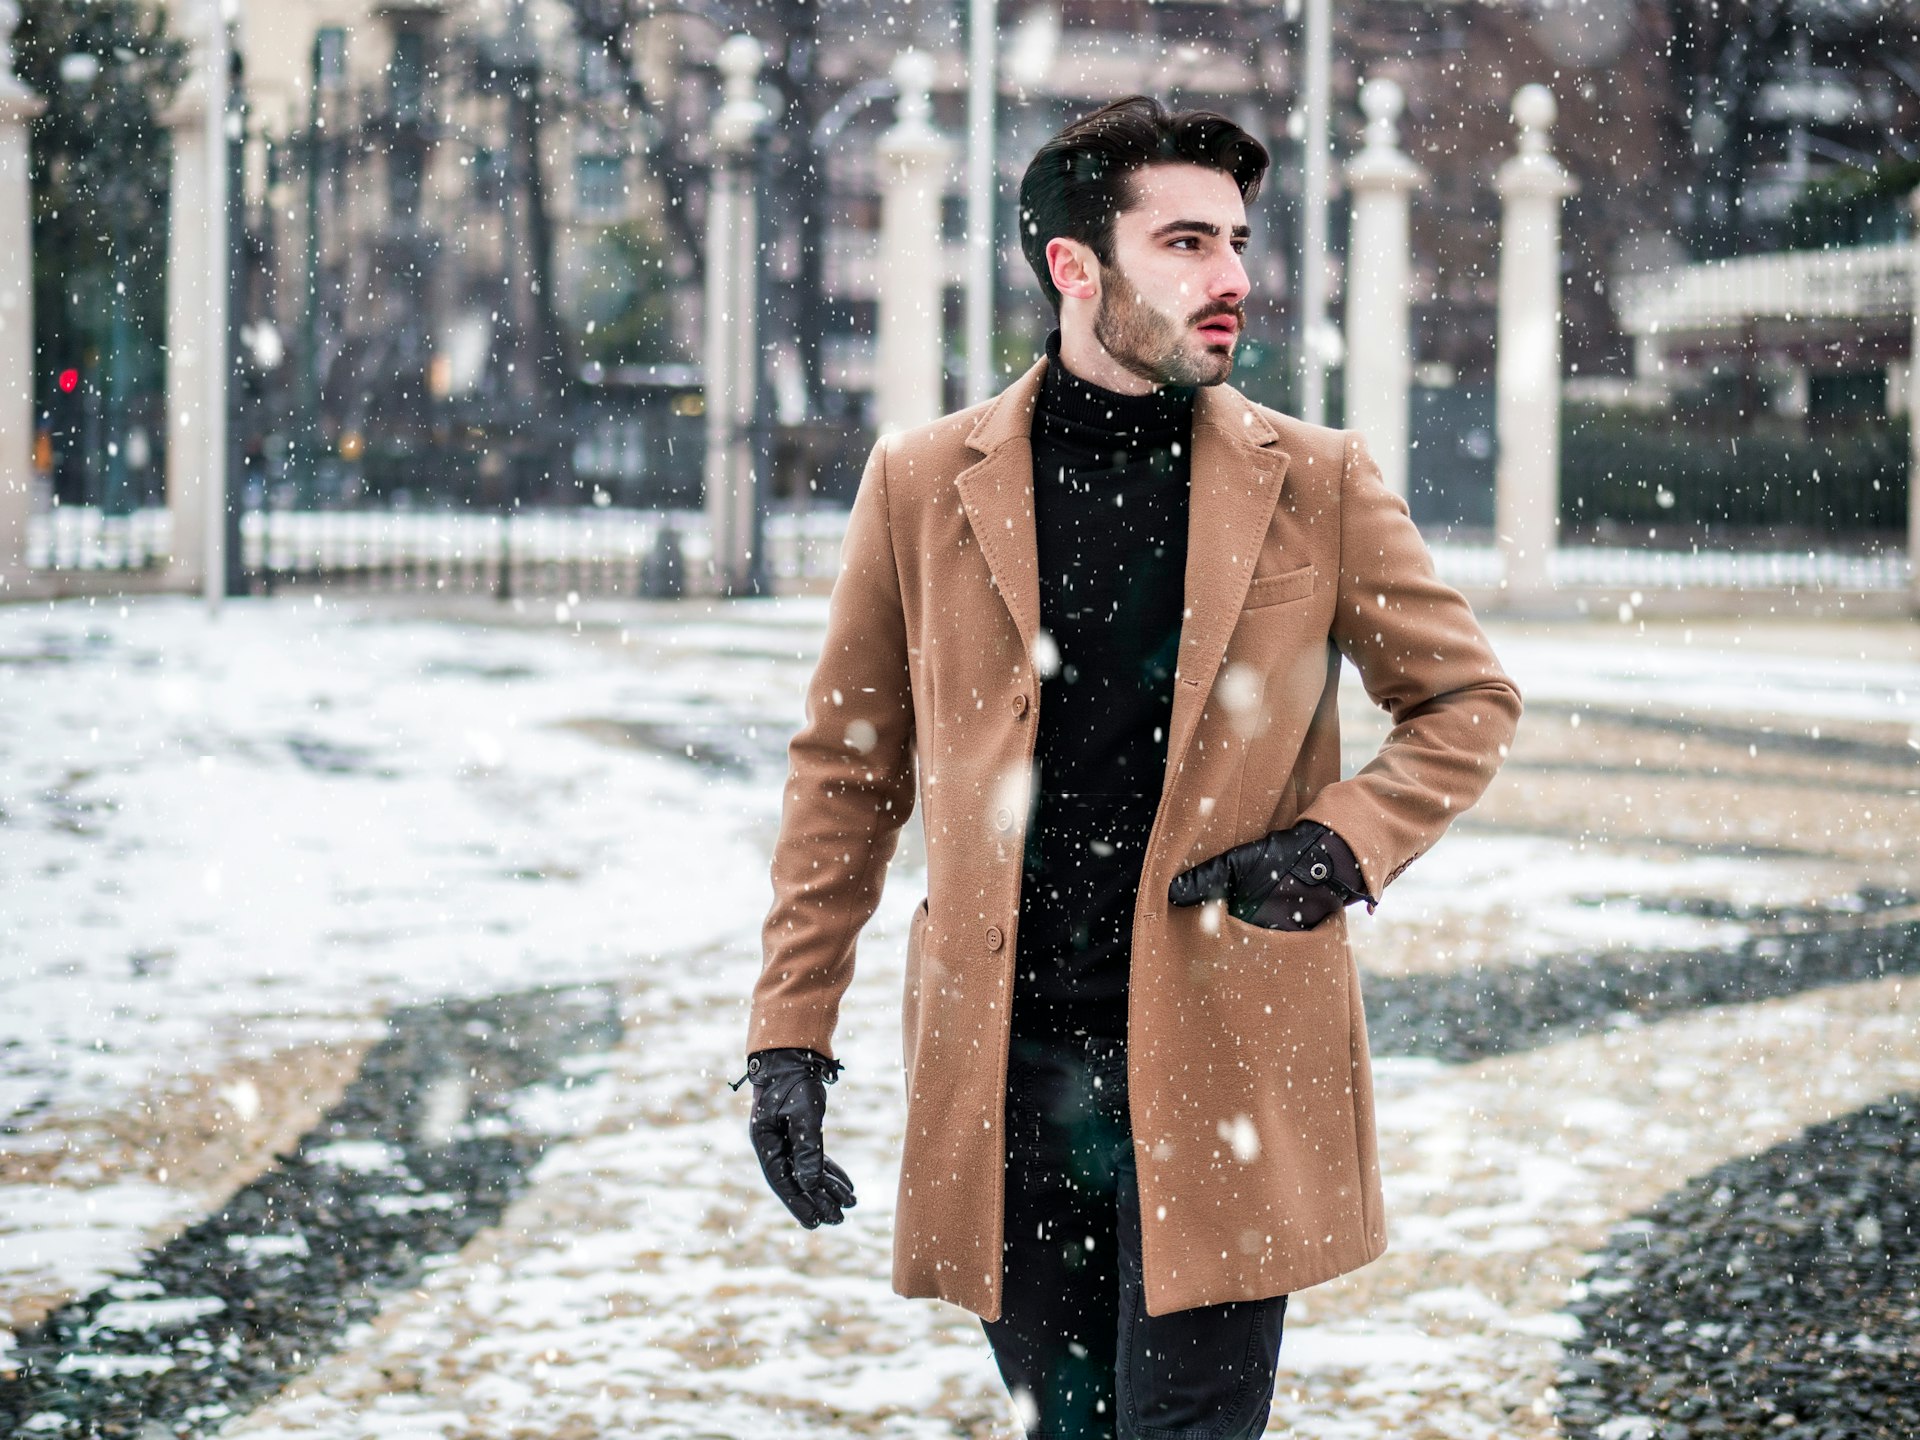 Handsome young man standing outside in winter, in snowy Turin, in Italy, in a cream coat